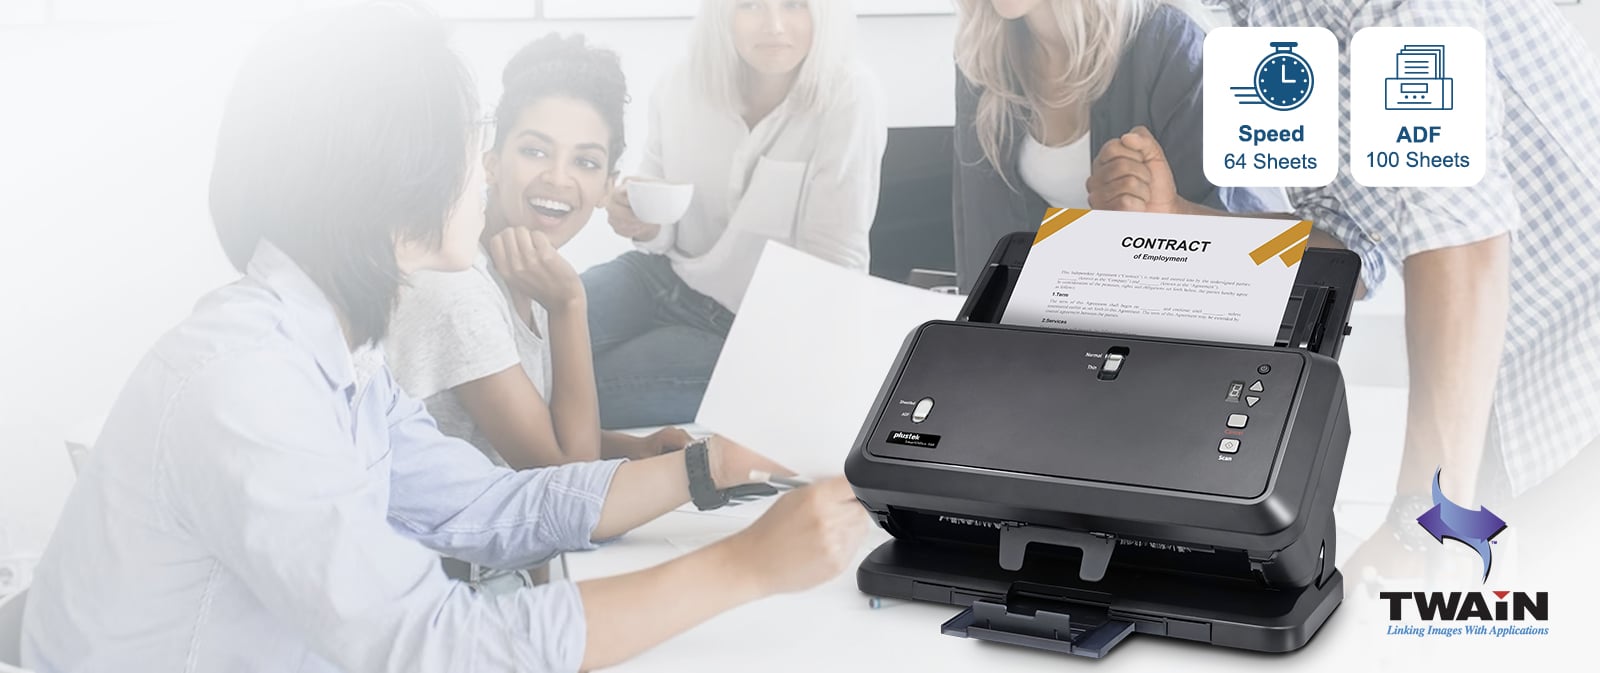 Scanner with a speed of 64 pages per minute, capable of scanning up to A3 size, and TWAIN compliant